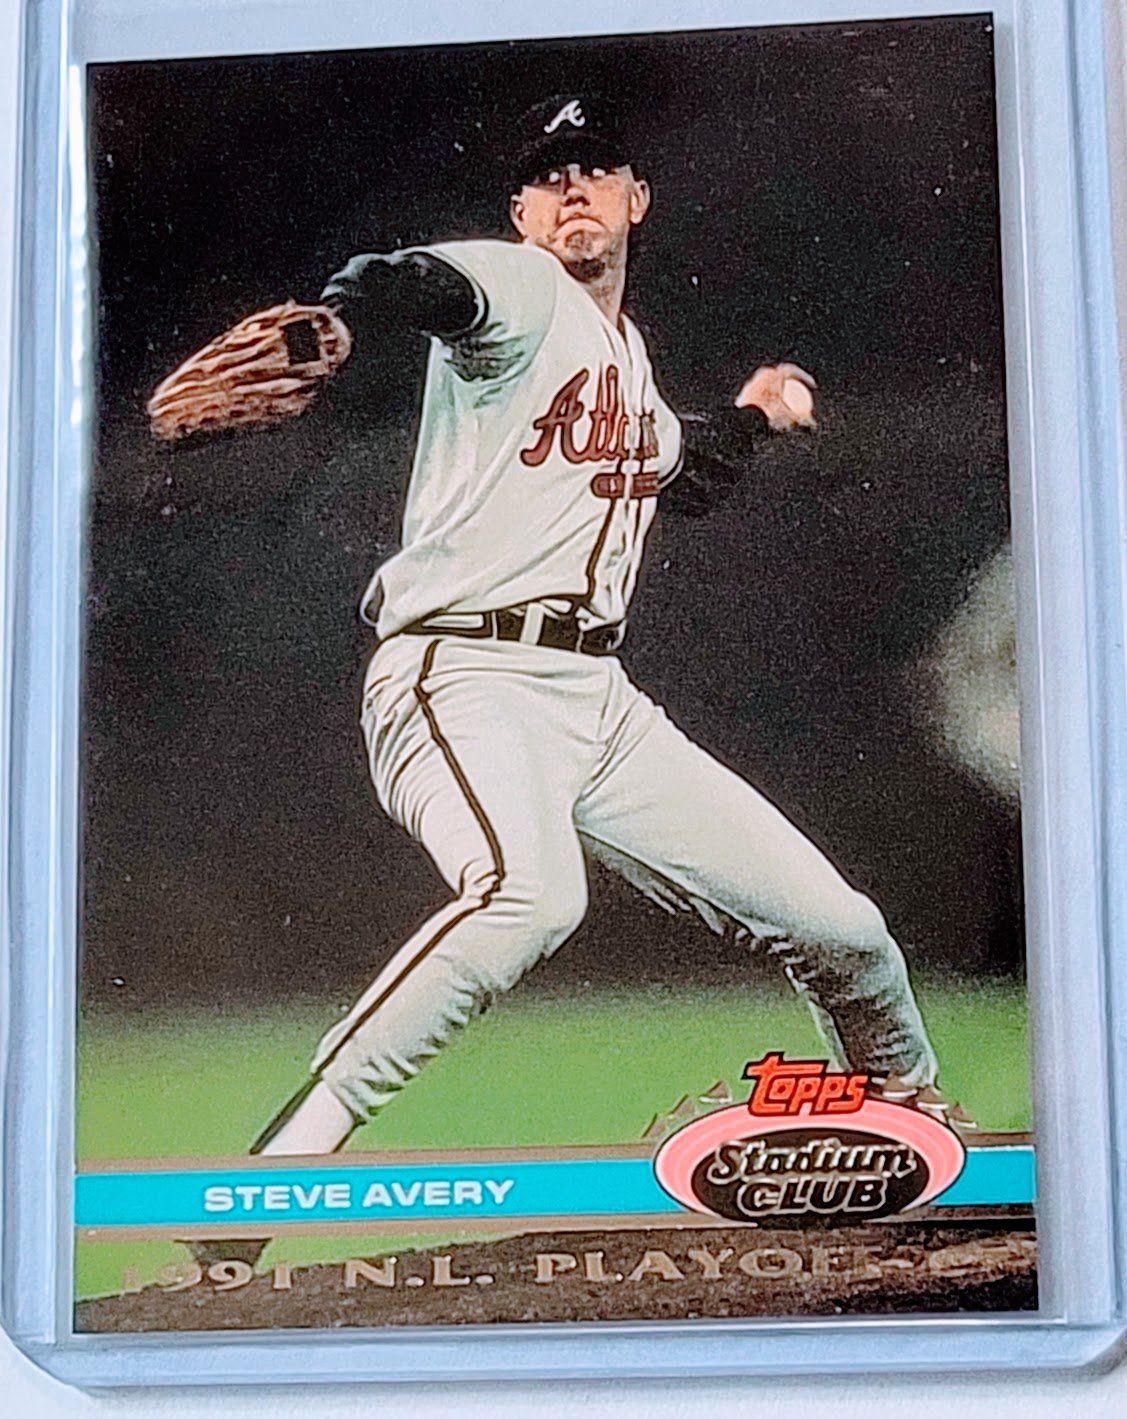 1992 Topps Stadium Club Dome Steve Avery 1991 Playoffs MLB Baseball Trading Card TPTV simple Xclusive Collectibles   